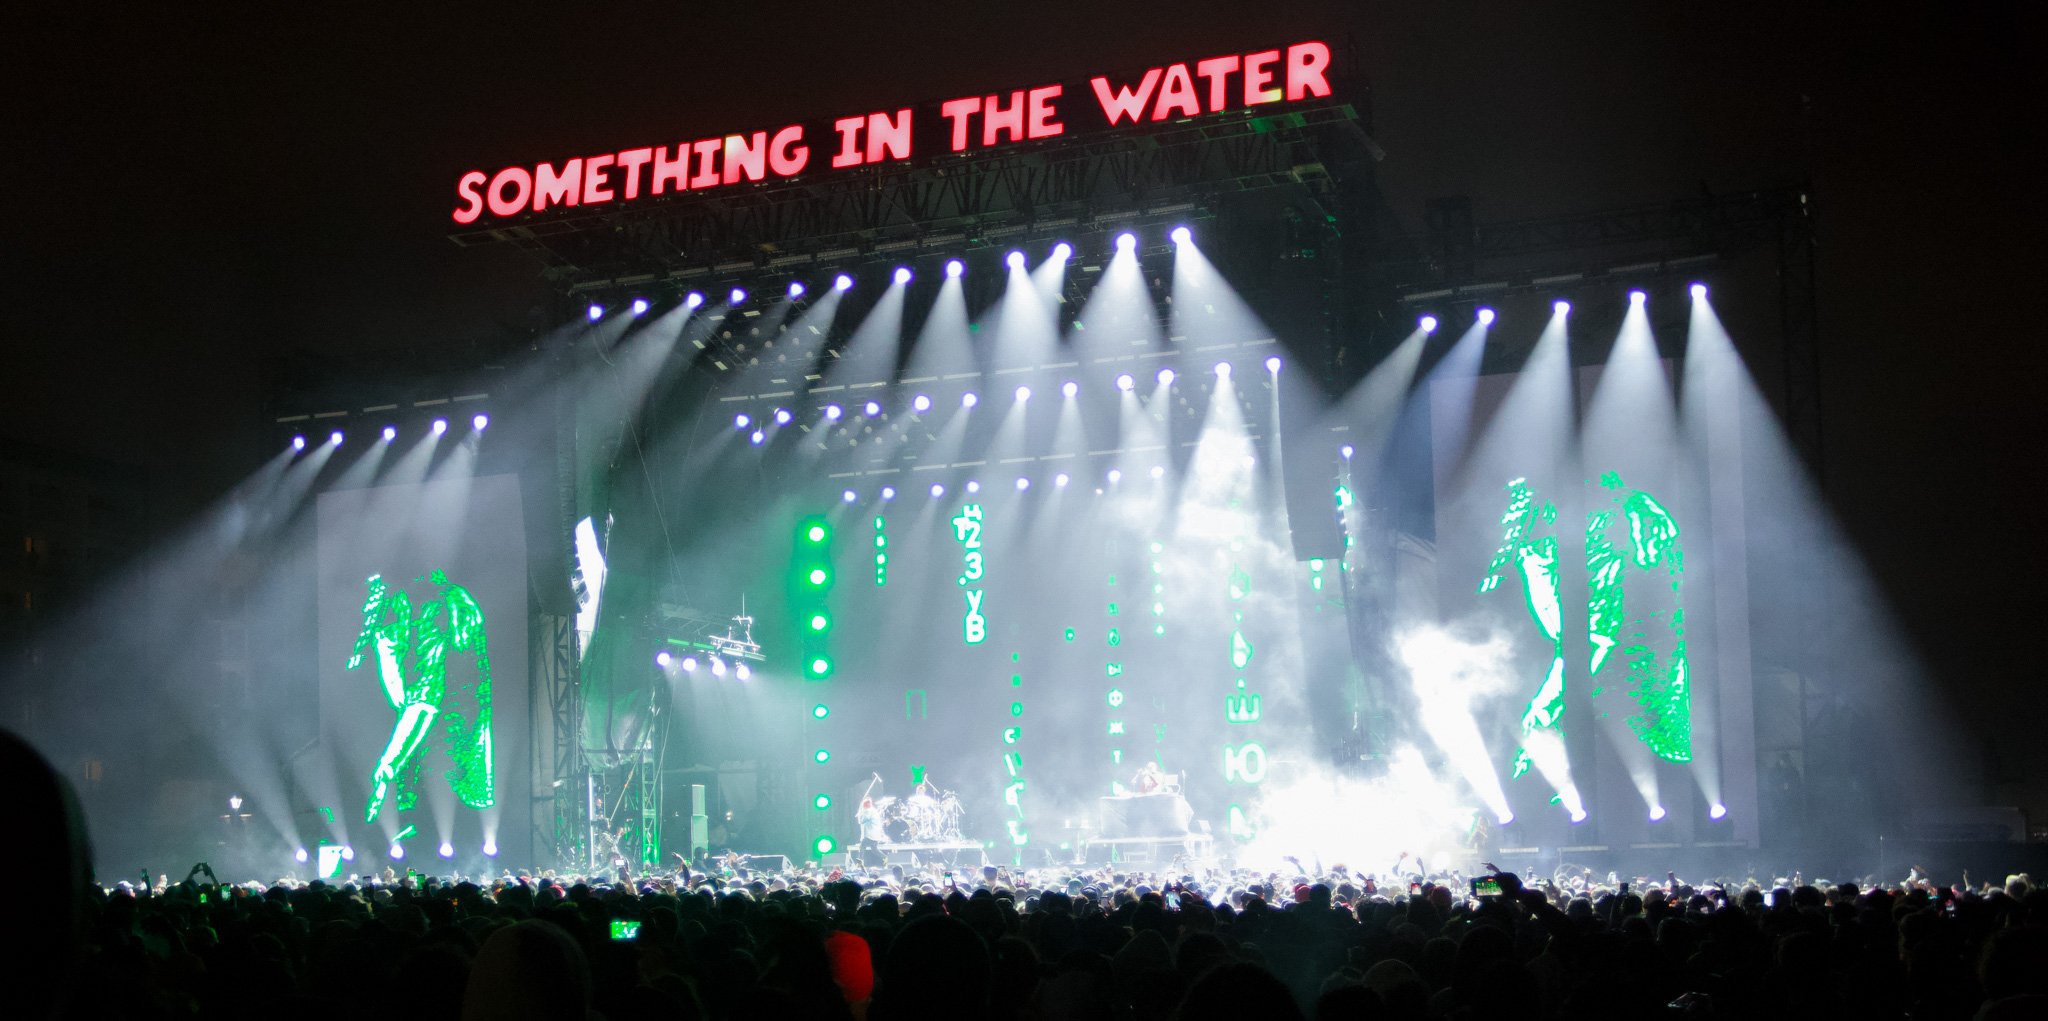 Pharrell Williams Something in the Water Shines in the Rain with Harford Sound and CHAUVET Professional